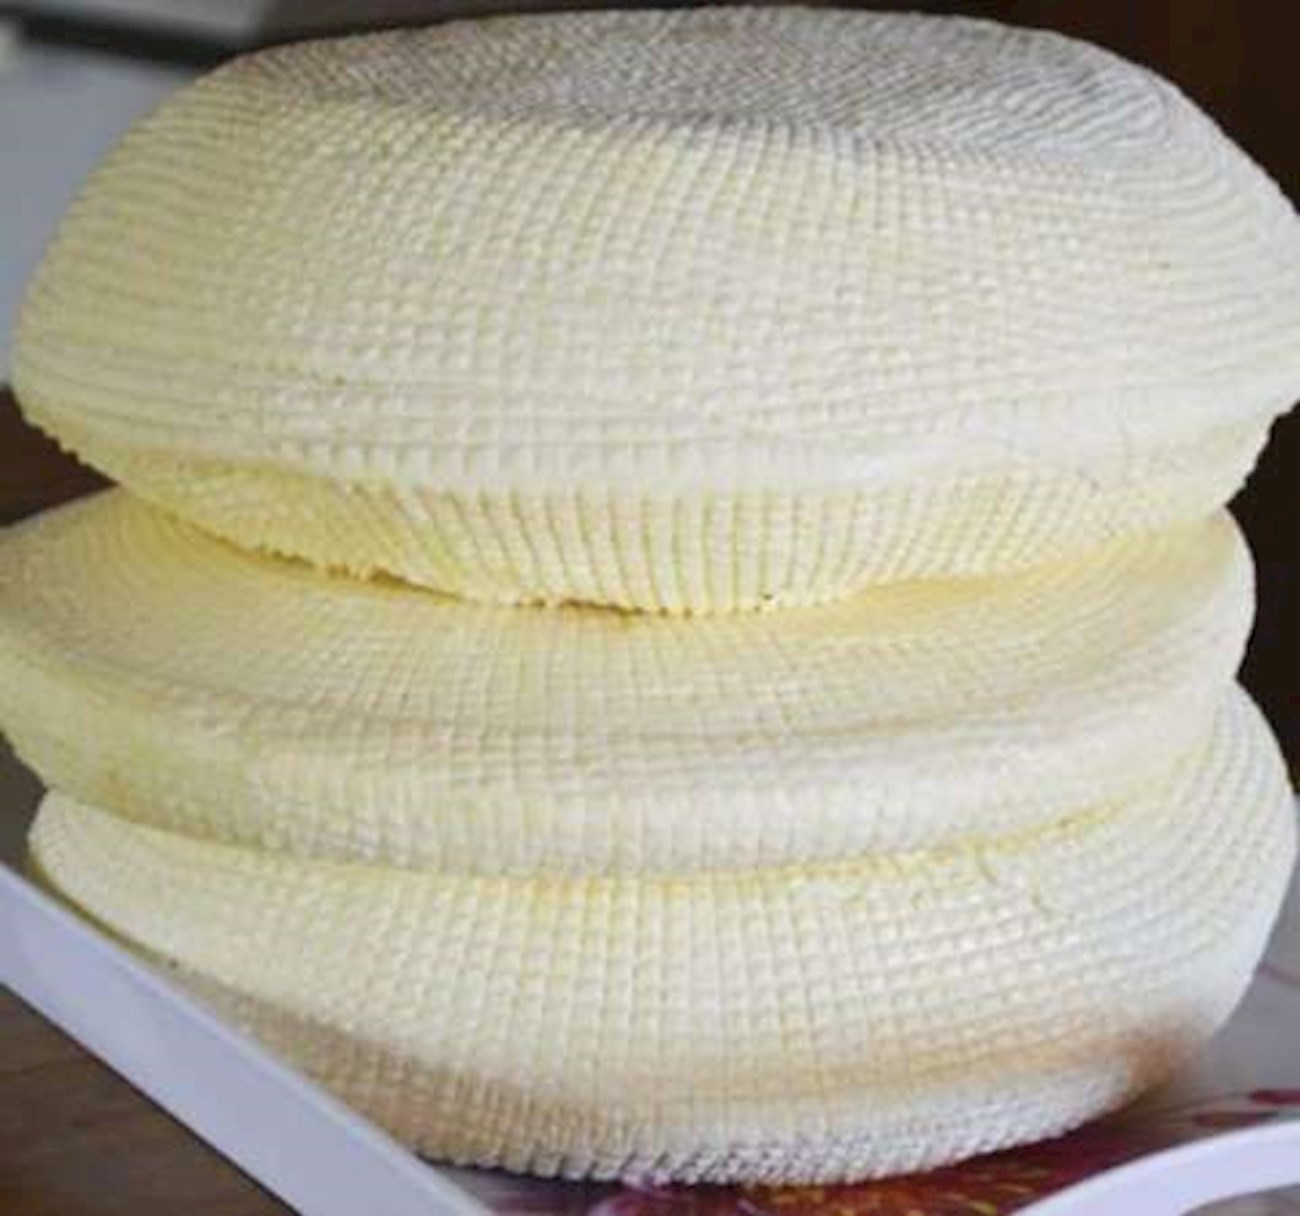 3 Most Popular South American Rindless Cheeses